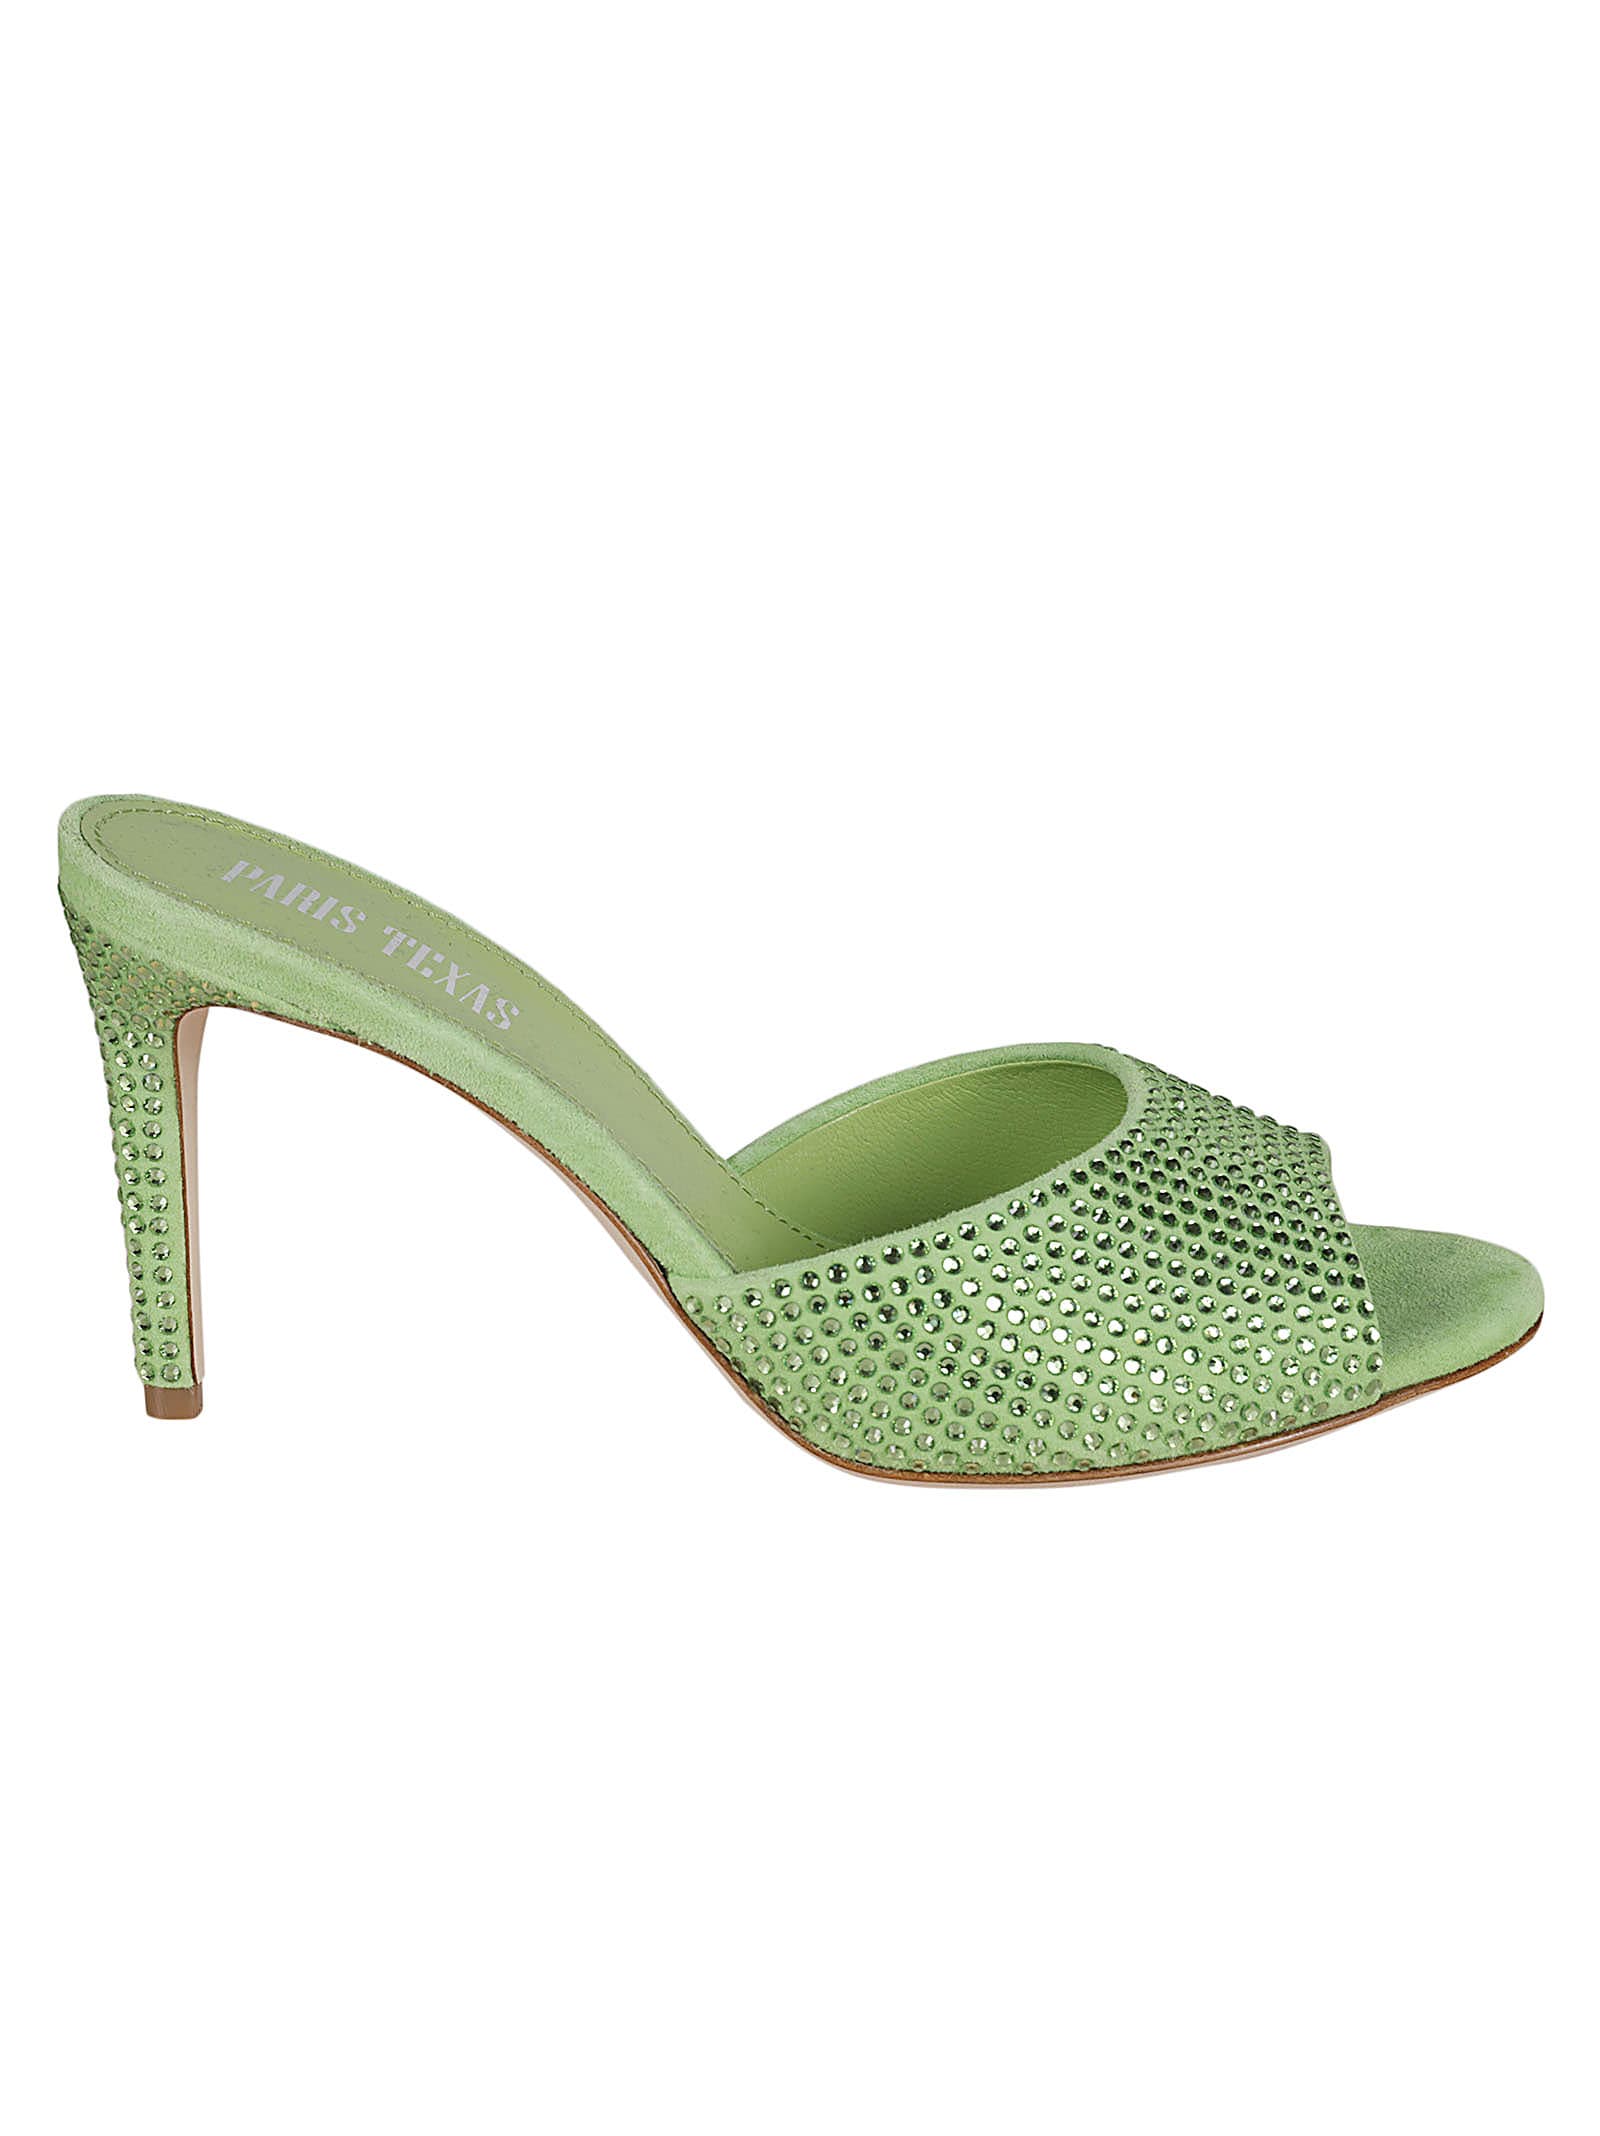 Paris Texas Holly Stiletto Mules In Green